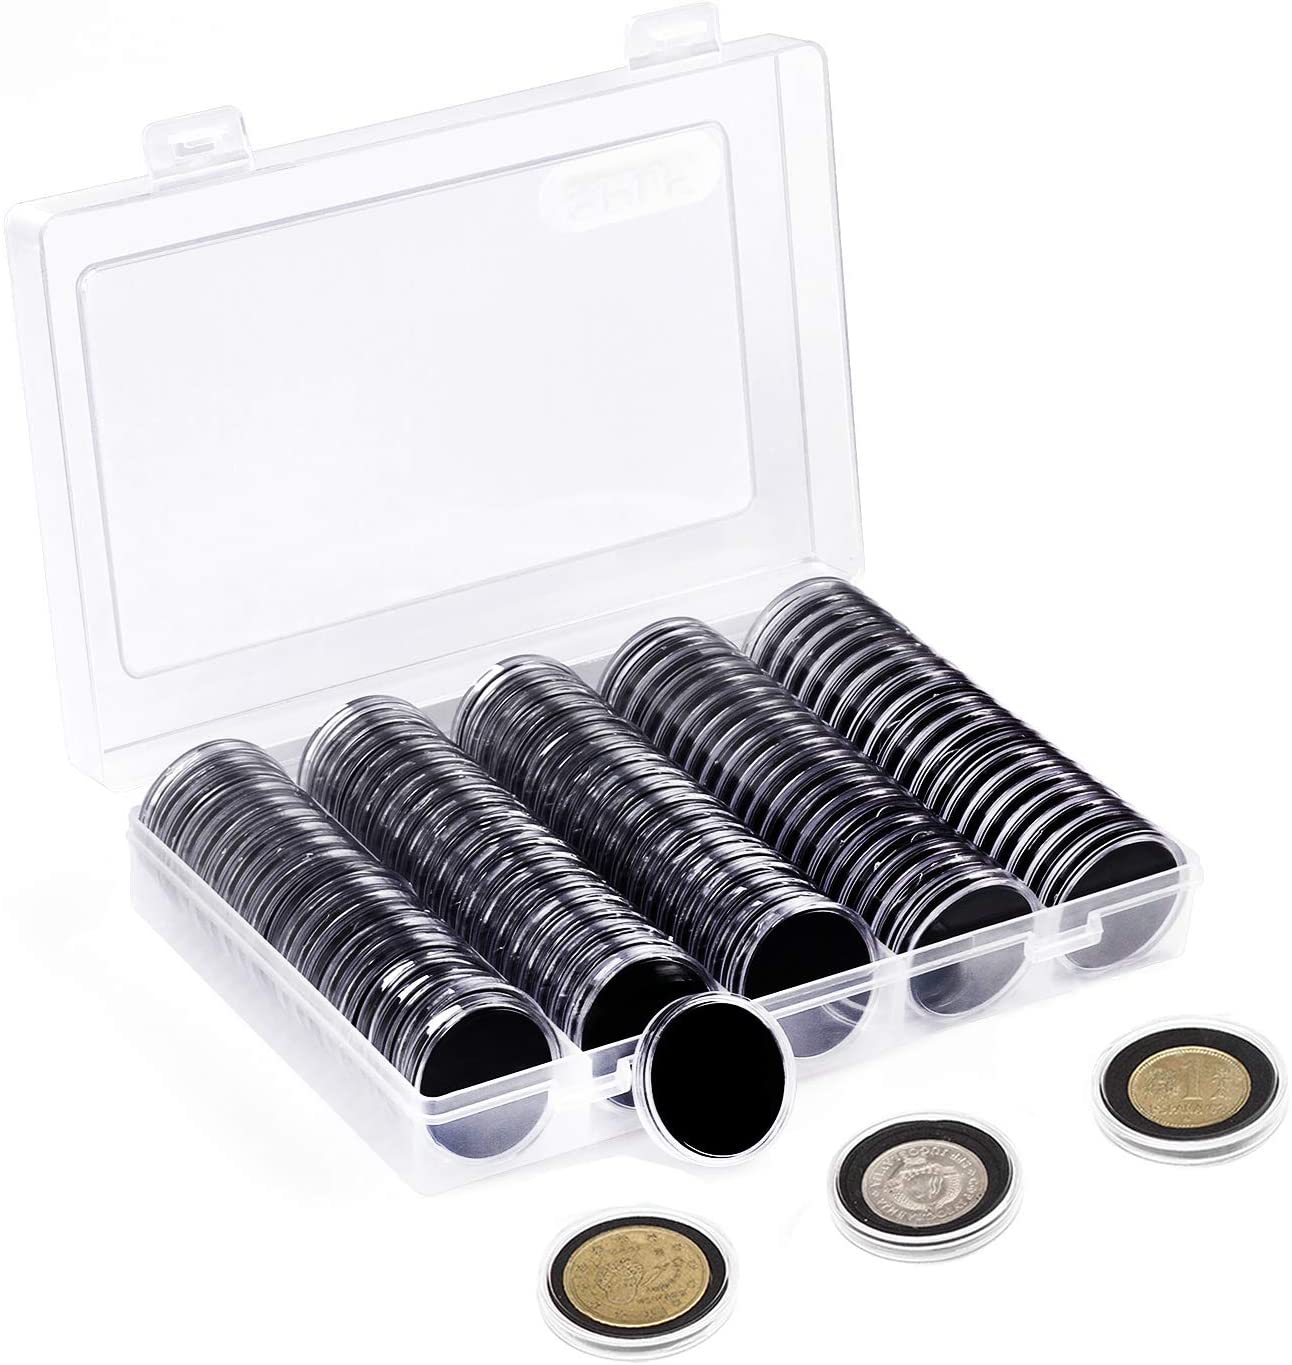 SPLF 100 Pieces 30mm Coin Capsules and 5 Sizes (17/20/25/27/30mm) Protect  Gasket Coin Holder Case with Plastic Storage Organizer Box for Coin  Collection Supplies - SPLF